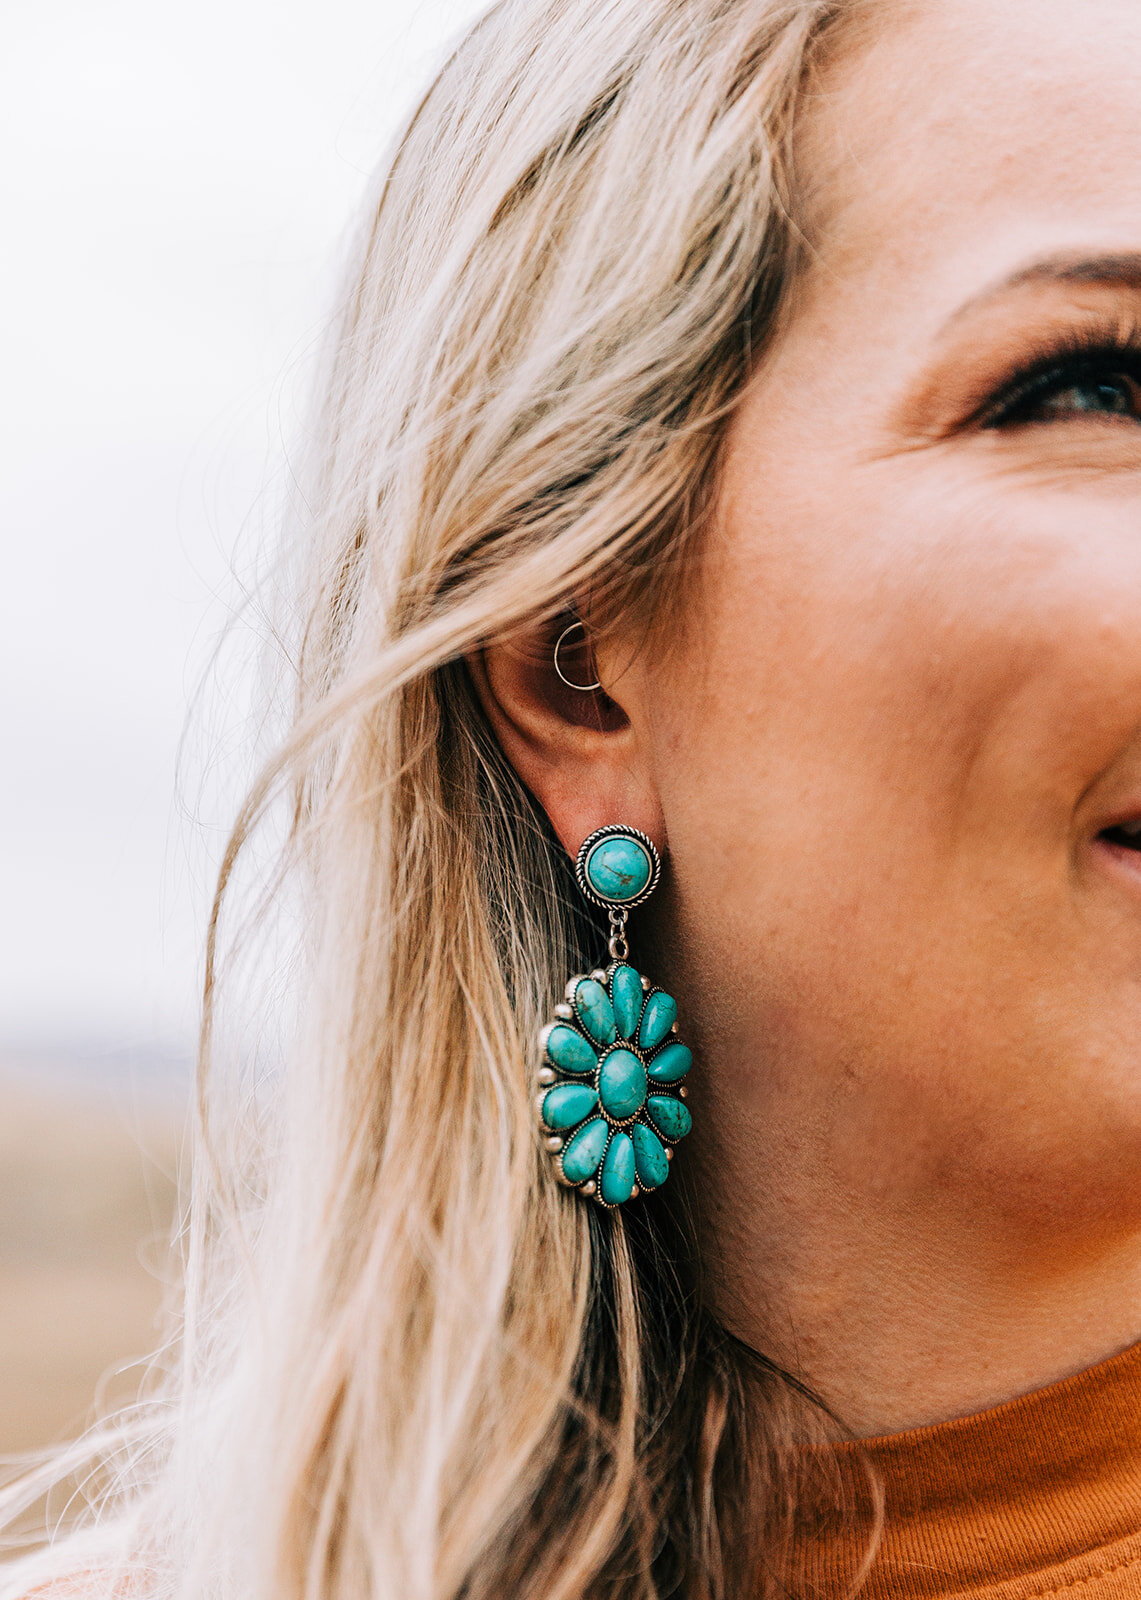  dangle earrings big earrings statement jewelry teal stones hairstyles long hairstyles hair and makeup inspiration country style professional photographers in utah commercial photographers in utah horses wild rag boutique commercial photography produ